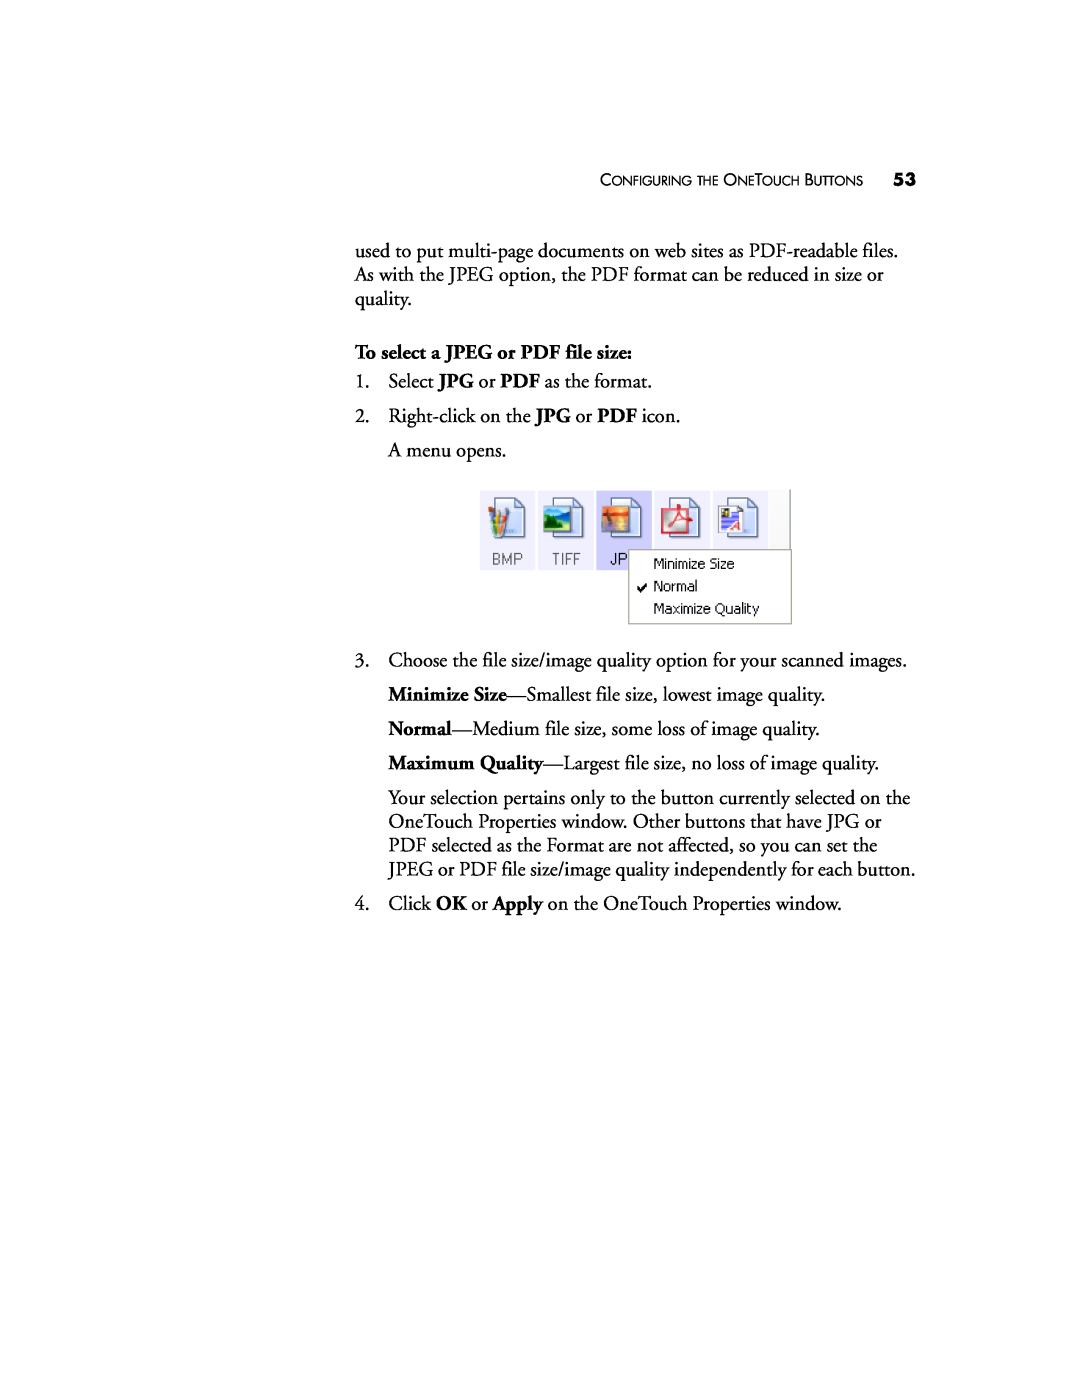 Visioneer 9750 manual To select a JPEG or PDF file size 